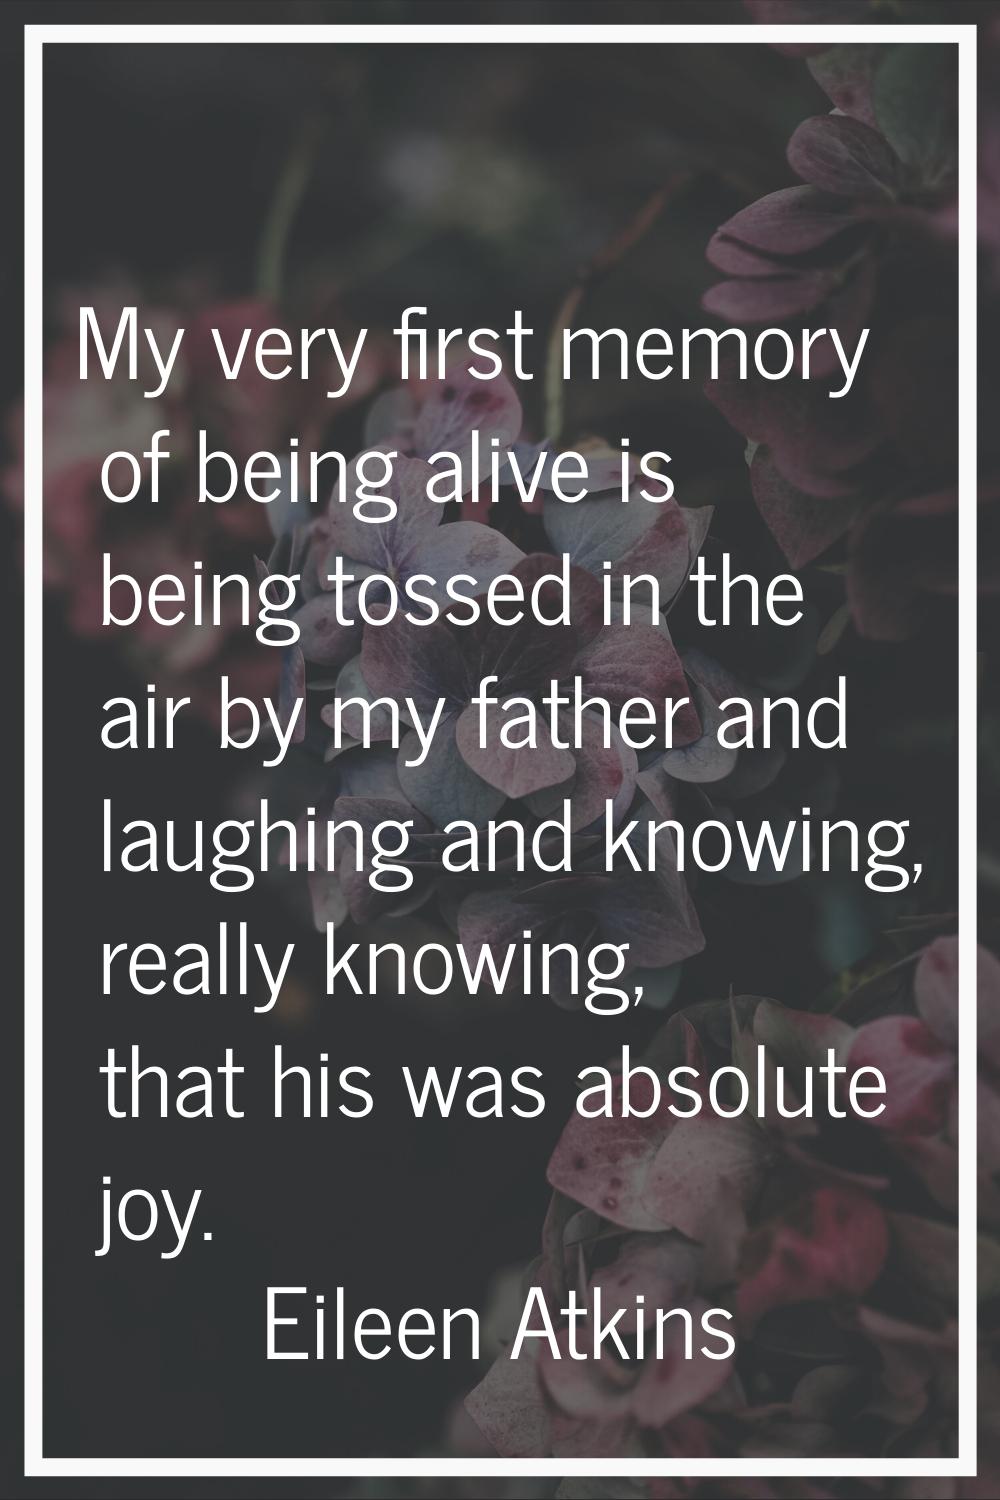 My very first memory of being alive is being tossed in the air by my father and laughing and knowin